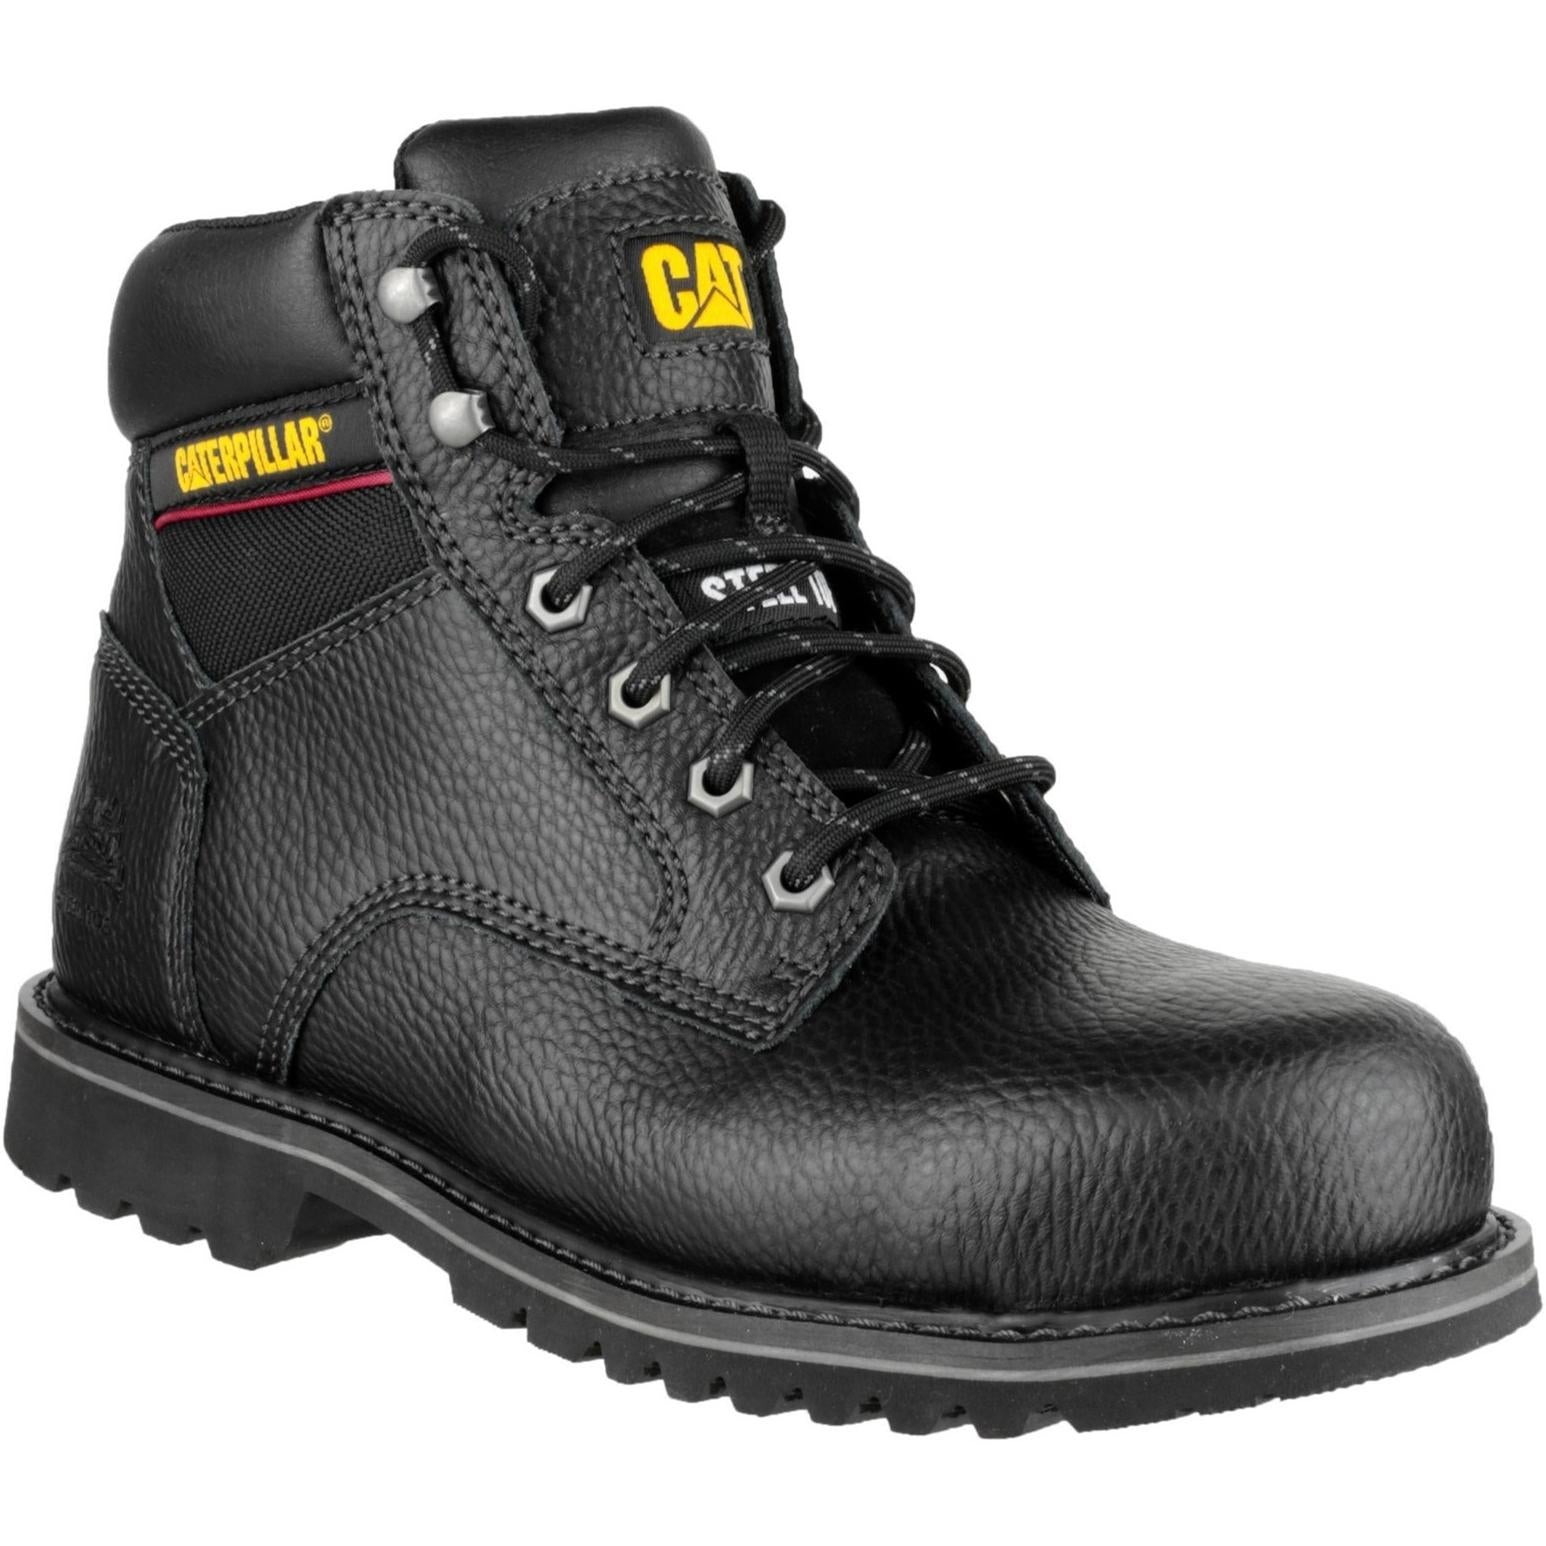 Caterpillar Electric 6 Safety Boot